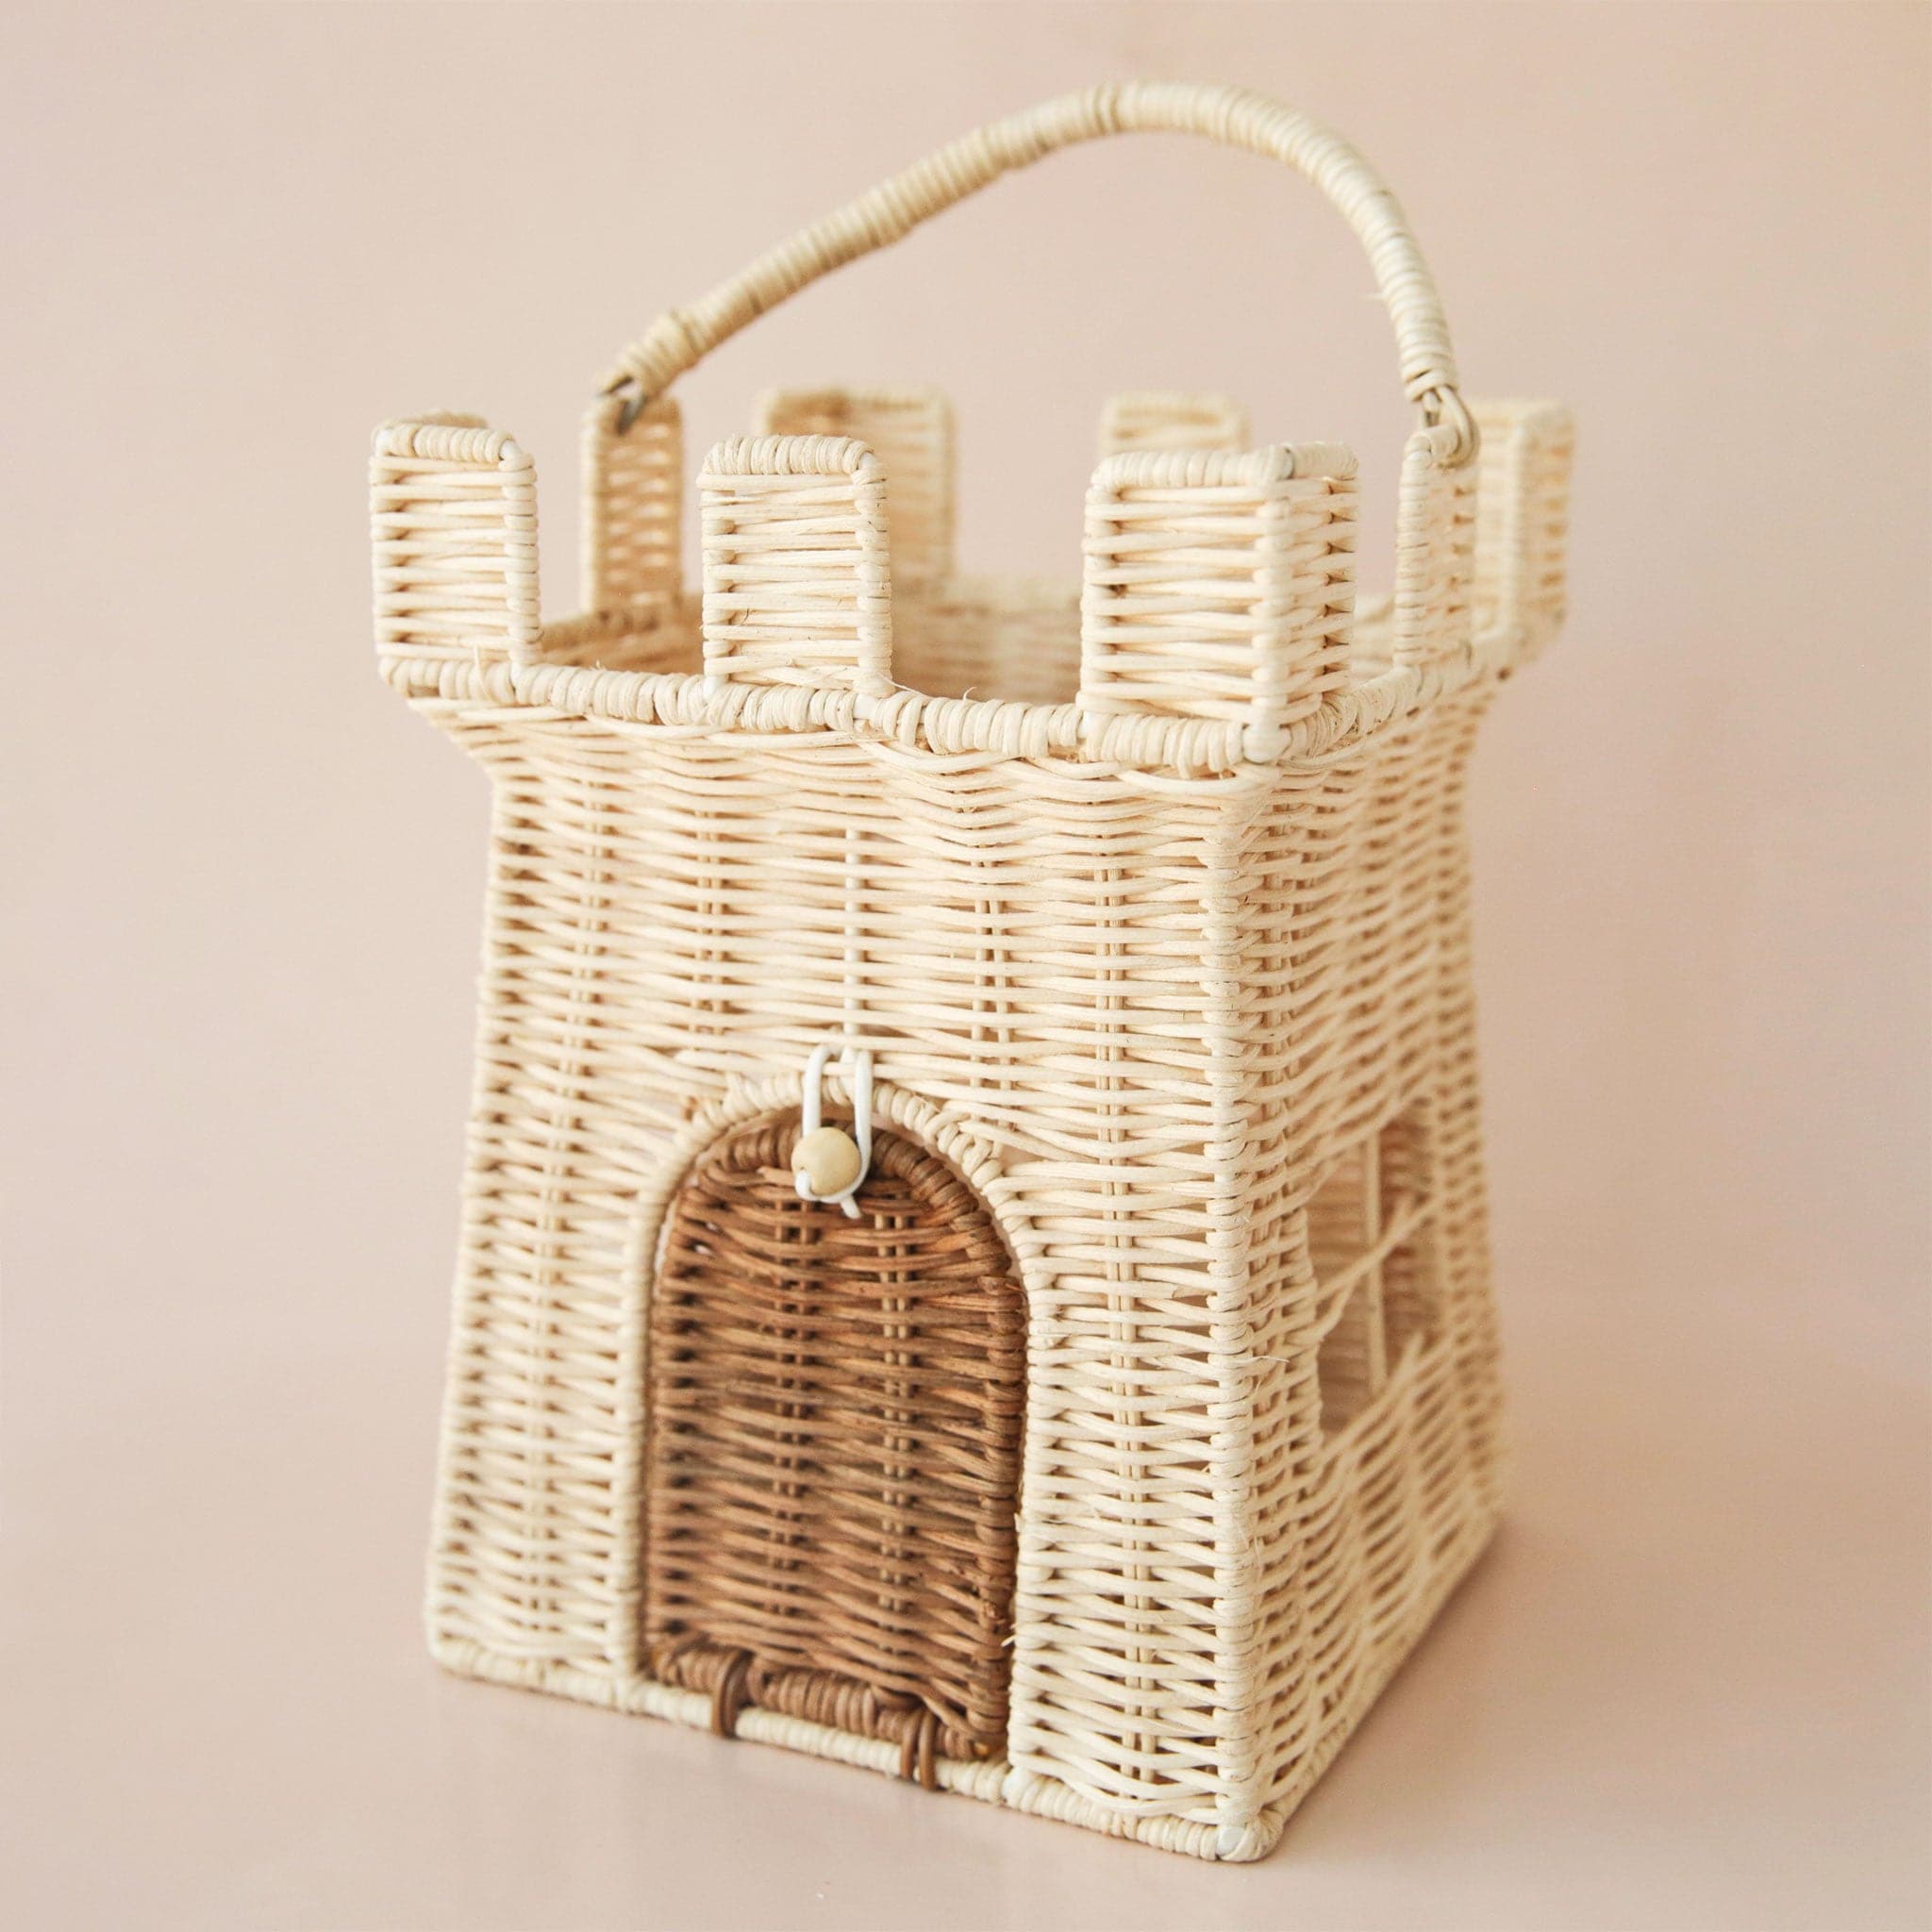 A wicker castle shaped basket with an open top as well as an opening where the door of the castle is. Also included is an attached handle for carrying around.